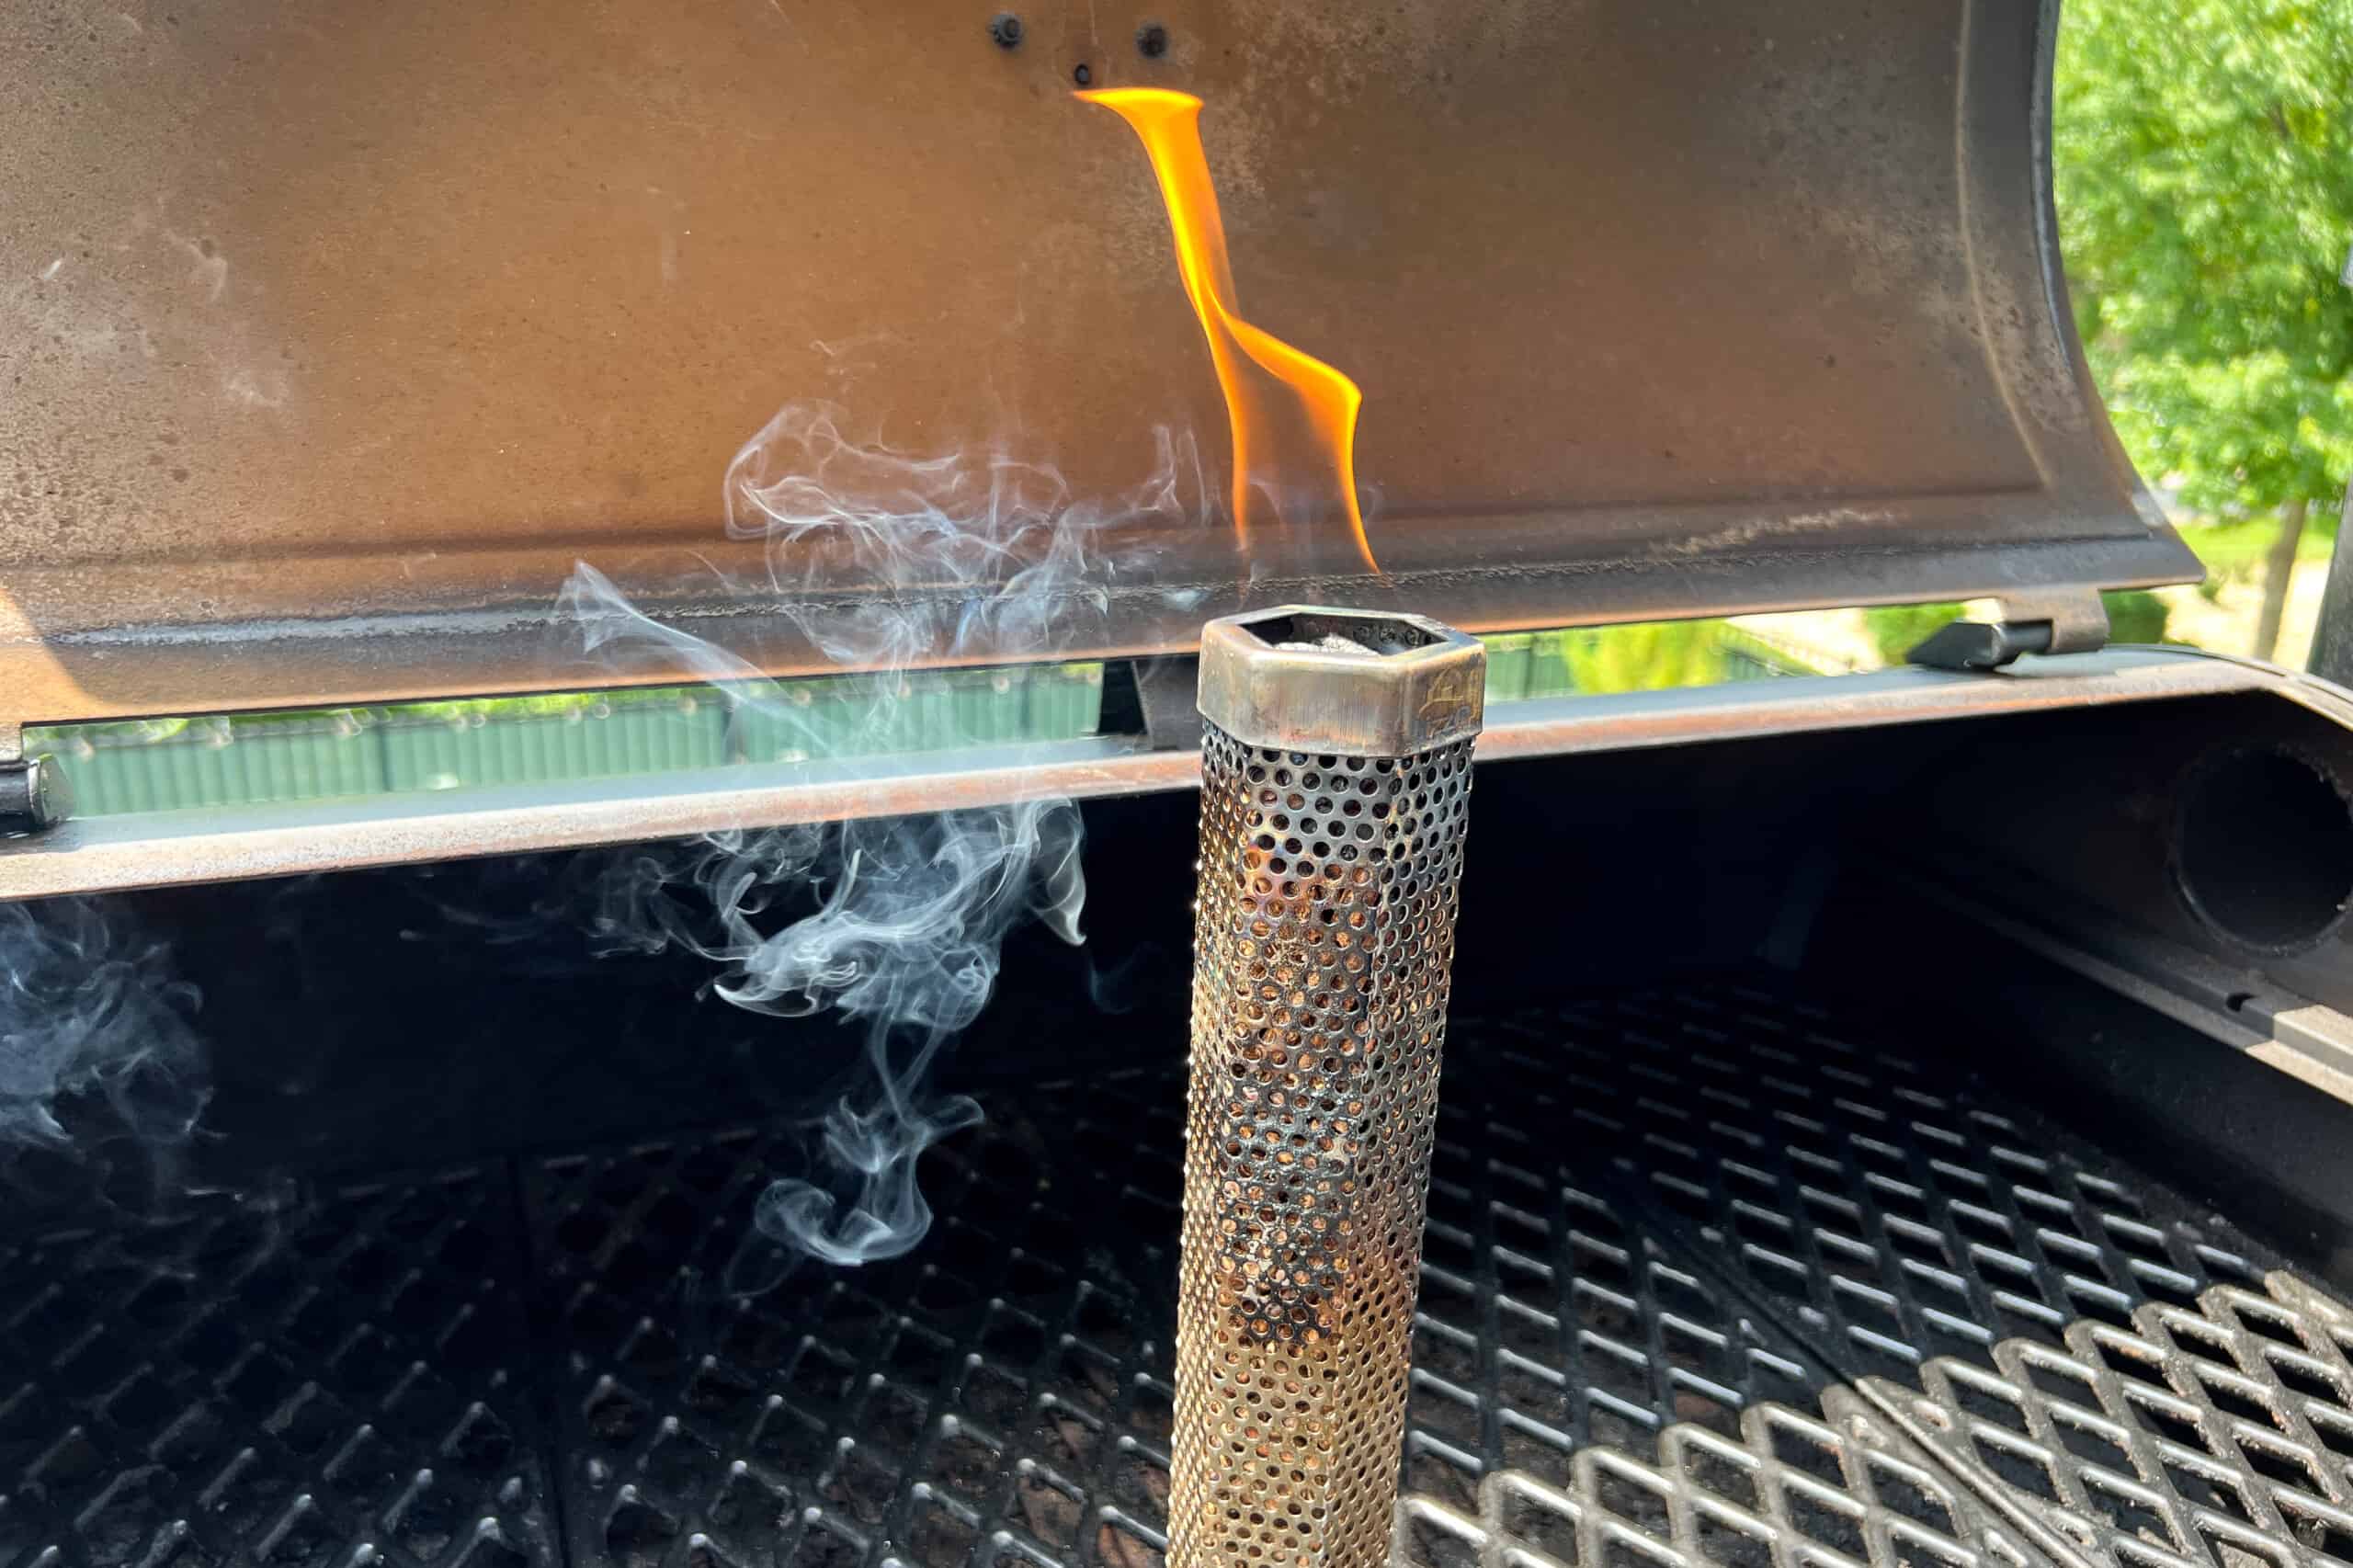 flame coming out of lit pellets at the top of the pellet smoker tube